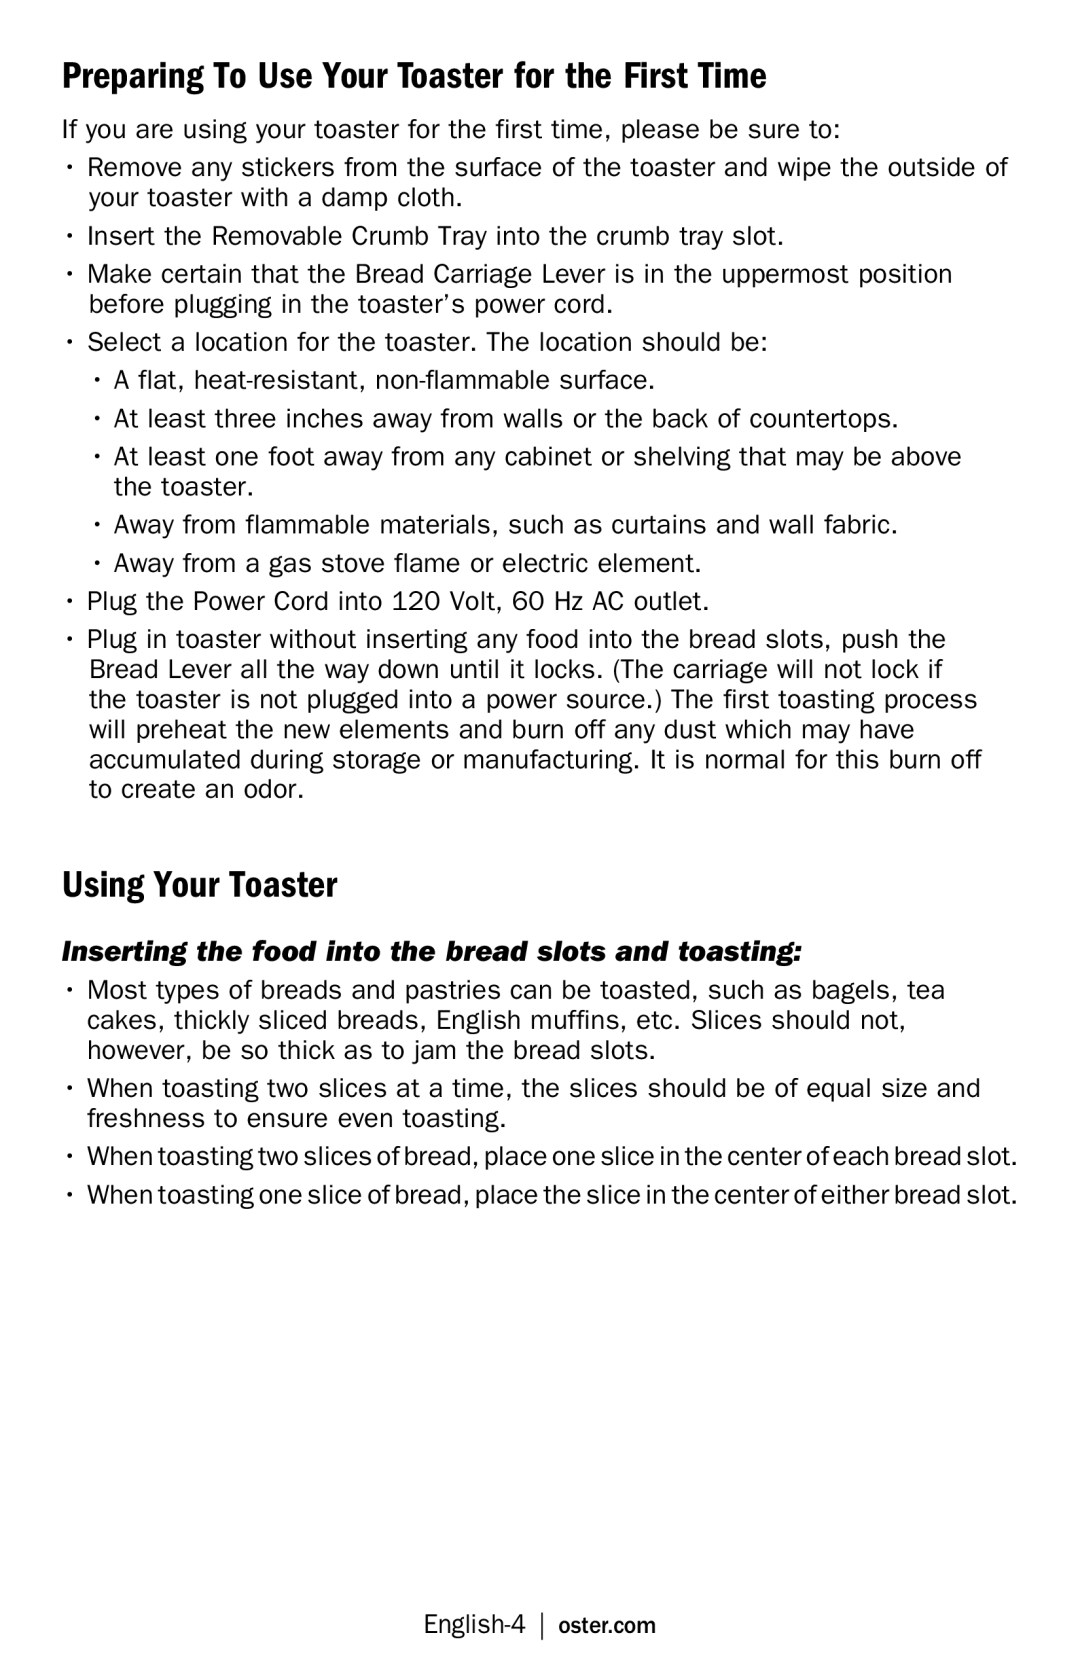 Oster TSSTTR6330, TSSTTR6329, TSSTTR6307 manual Preparing To Use Your Toaster for the First Time, Using Your Toaster 